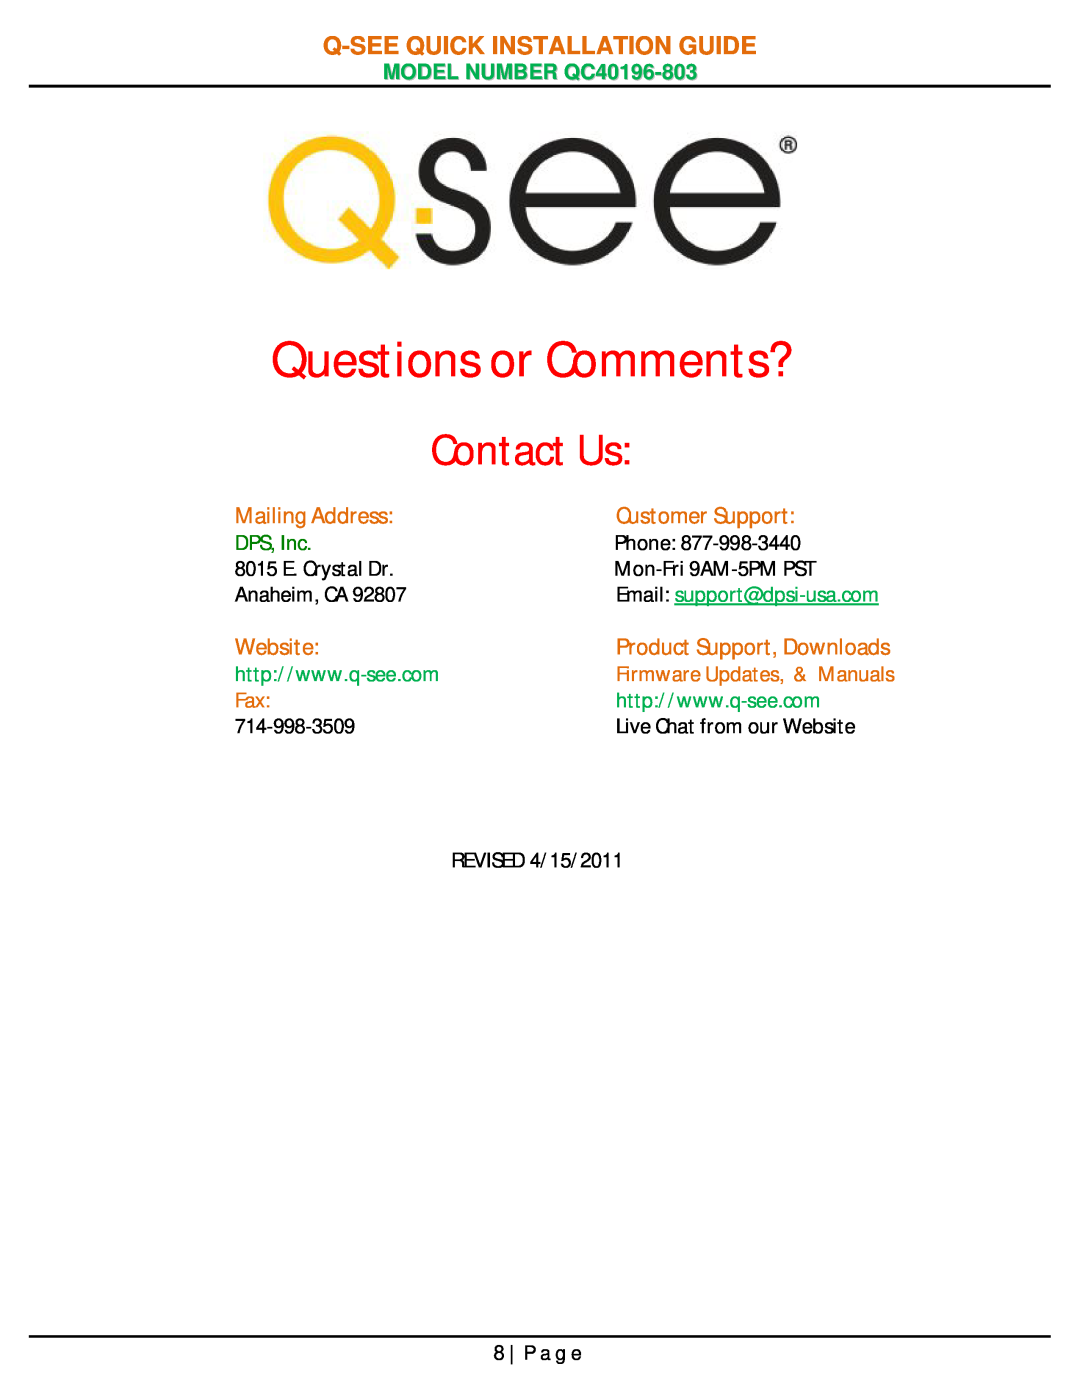 Q-See qc40196-803 P a g e, Questions or Comments?, Contact Us, Q-Seequick Installation Guide, Mailing Address, Website 